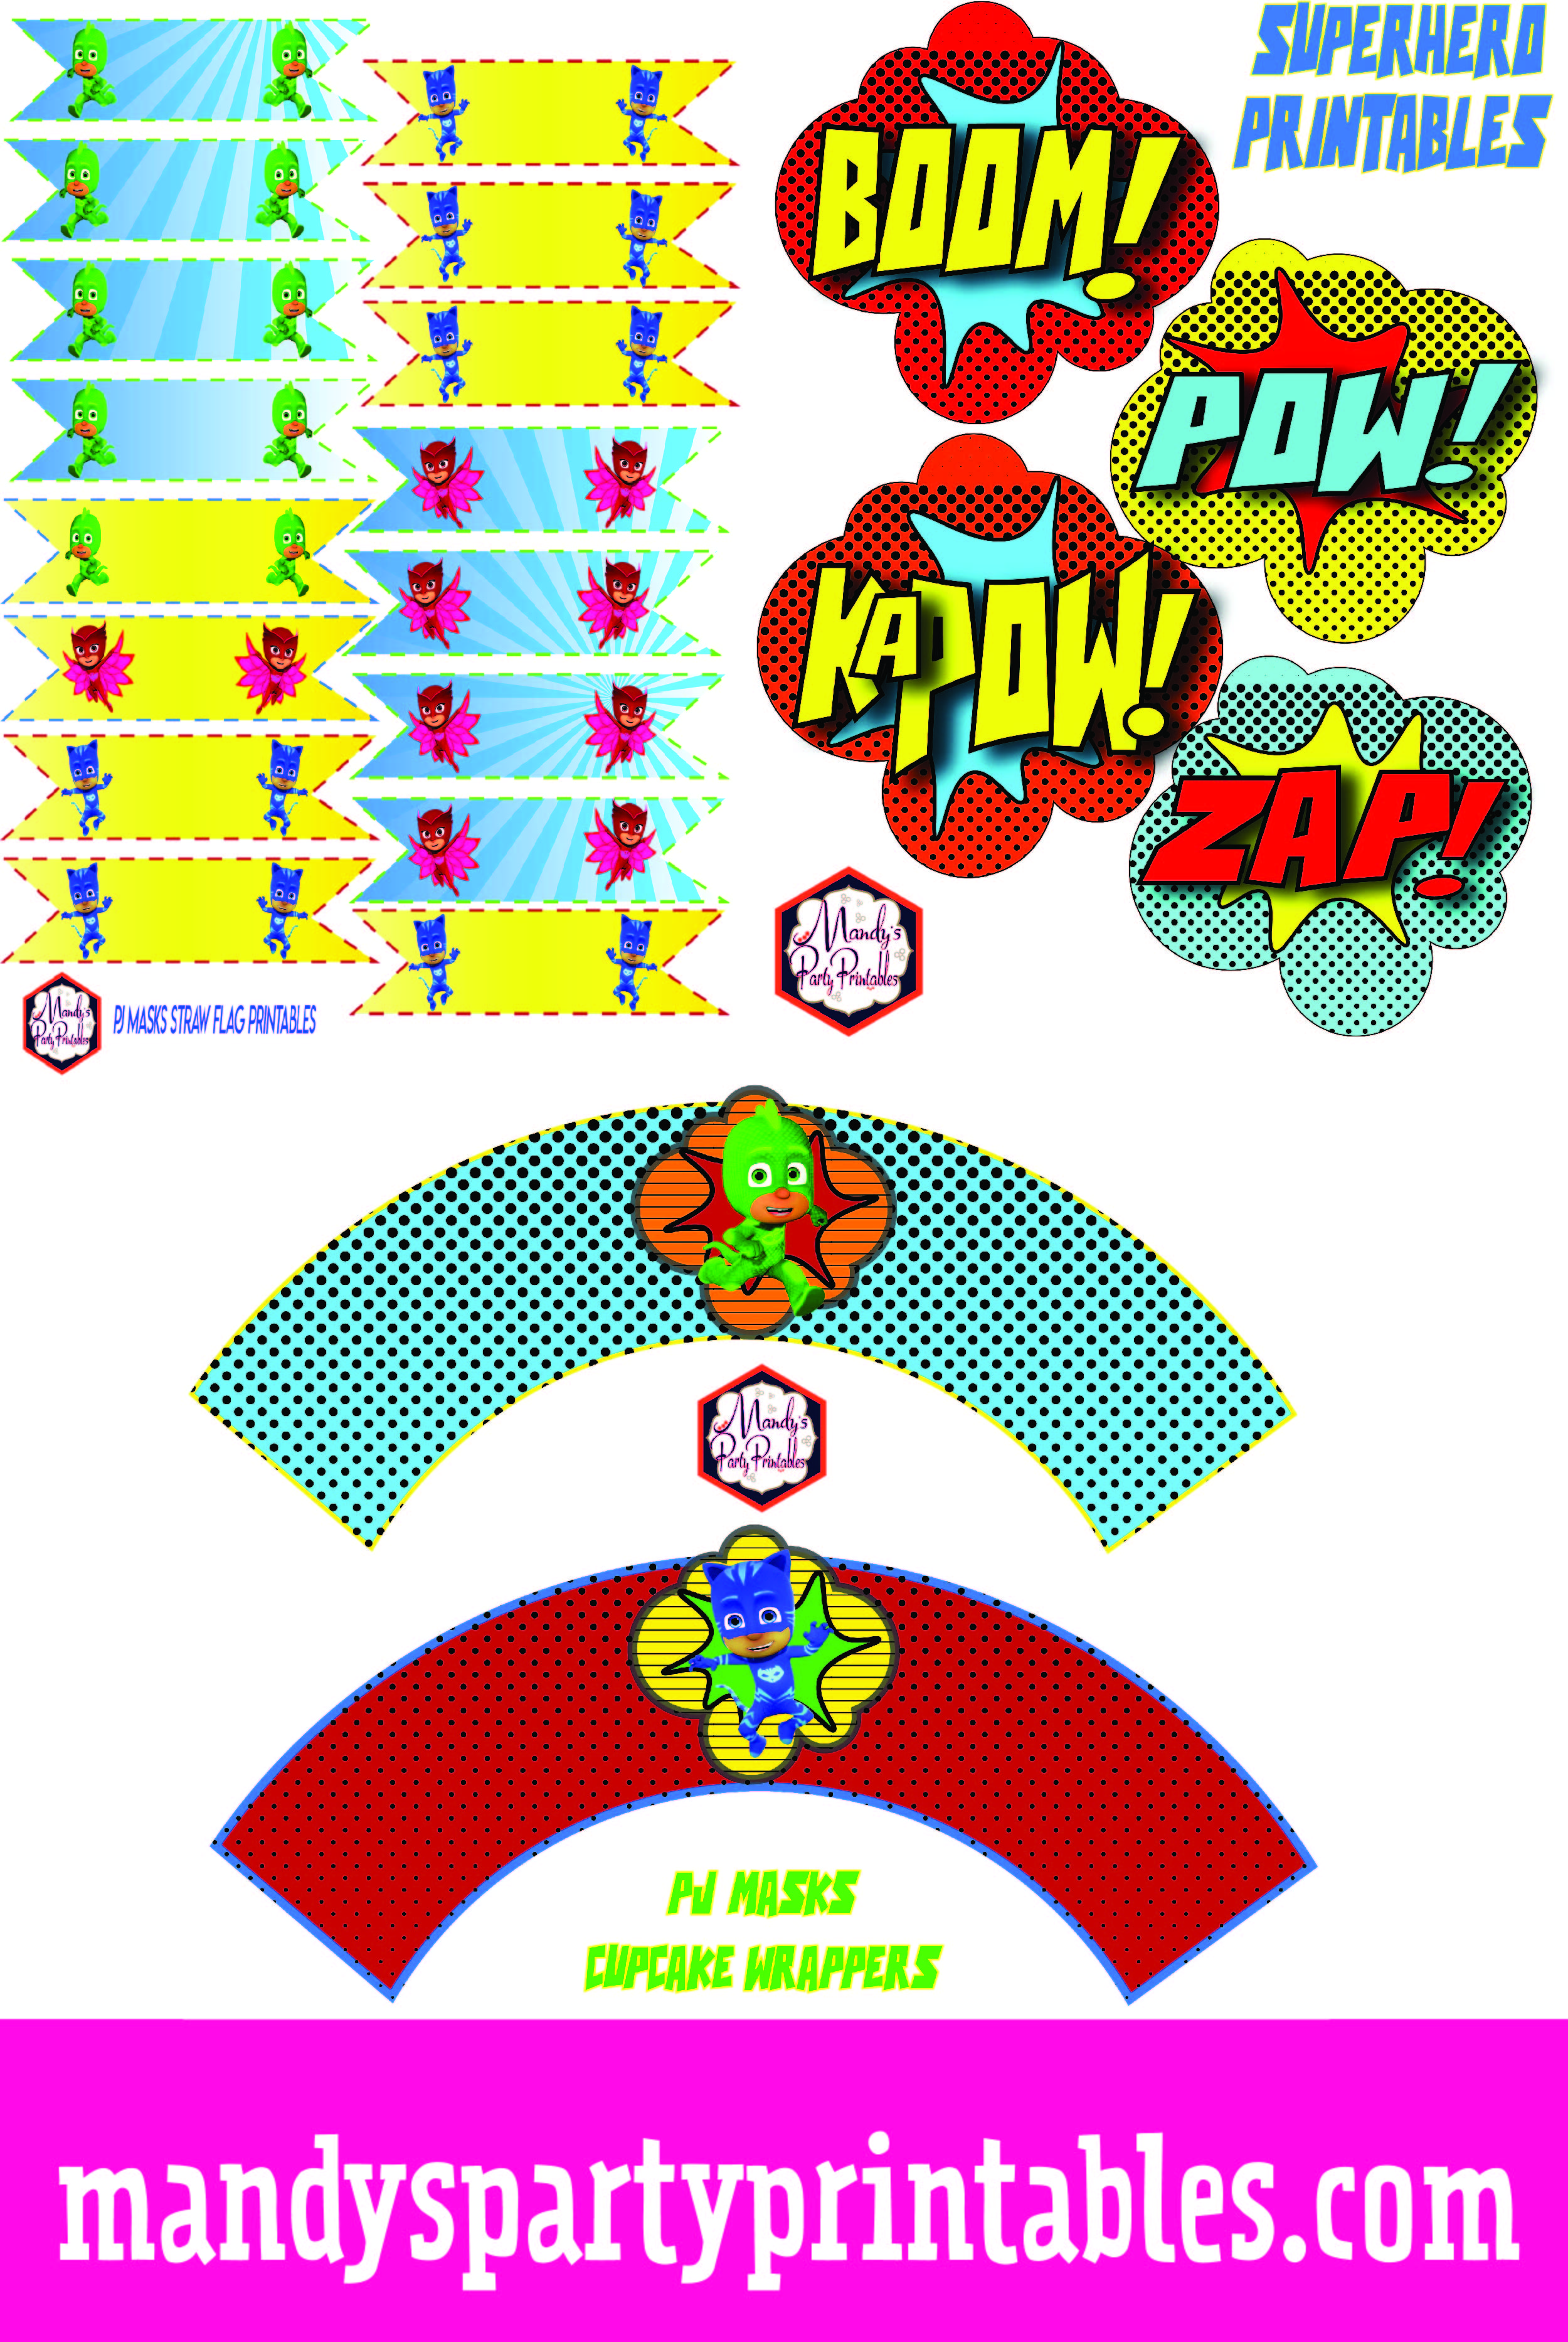 Collage of PJ Masks straw flags, superhero boom! pow! zap! and cupcake wrappers | Mandy's Party Printables 